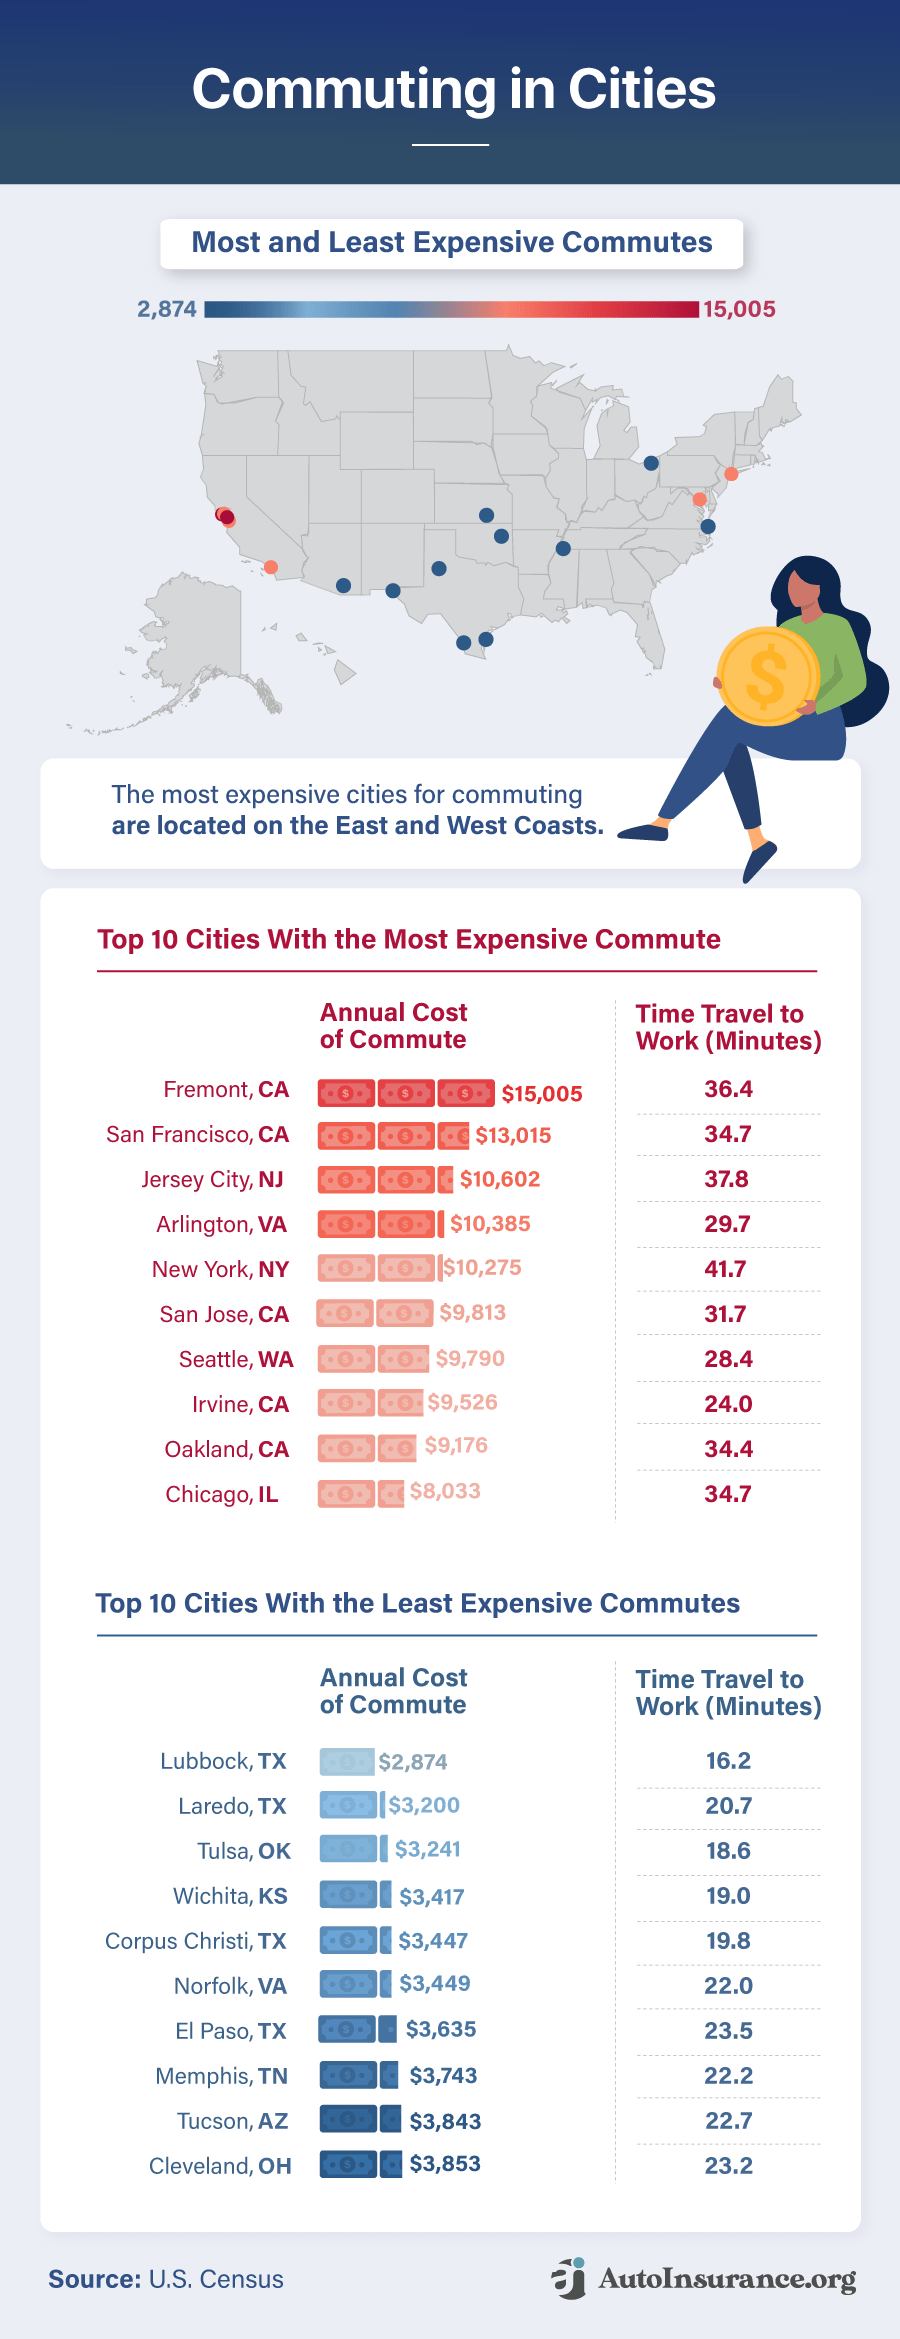 Most and Least Expensive Cities for Commuting